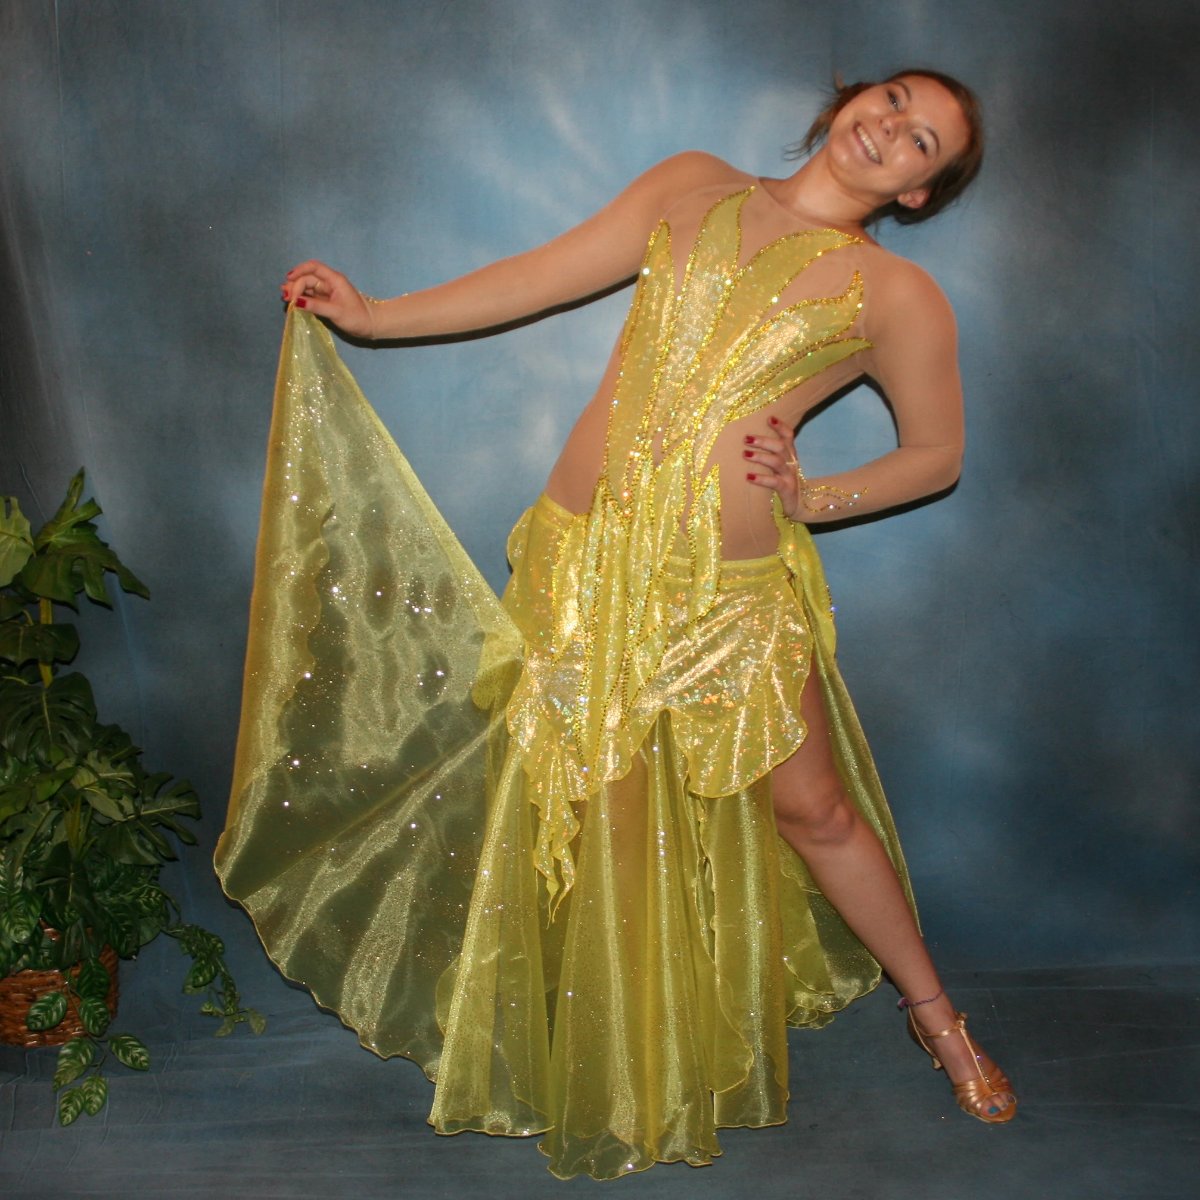 Crystal's Creations Yellow converta ballroom dress consisists of Latin/rhythm dress created of yellow hologram lycra overlayed artistically on nude  illusion base,  with handcut petal appliques on nude illusion base,embellished with citrine & jonquil ab Swarovski rhinestones, with converta skirt of yards of glittered organza.